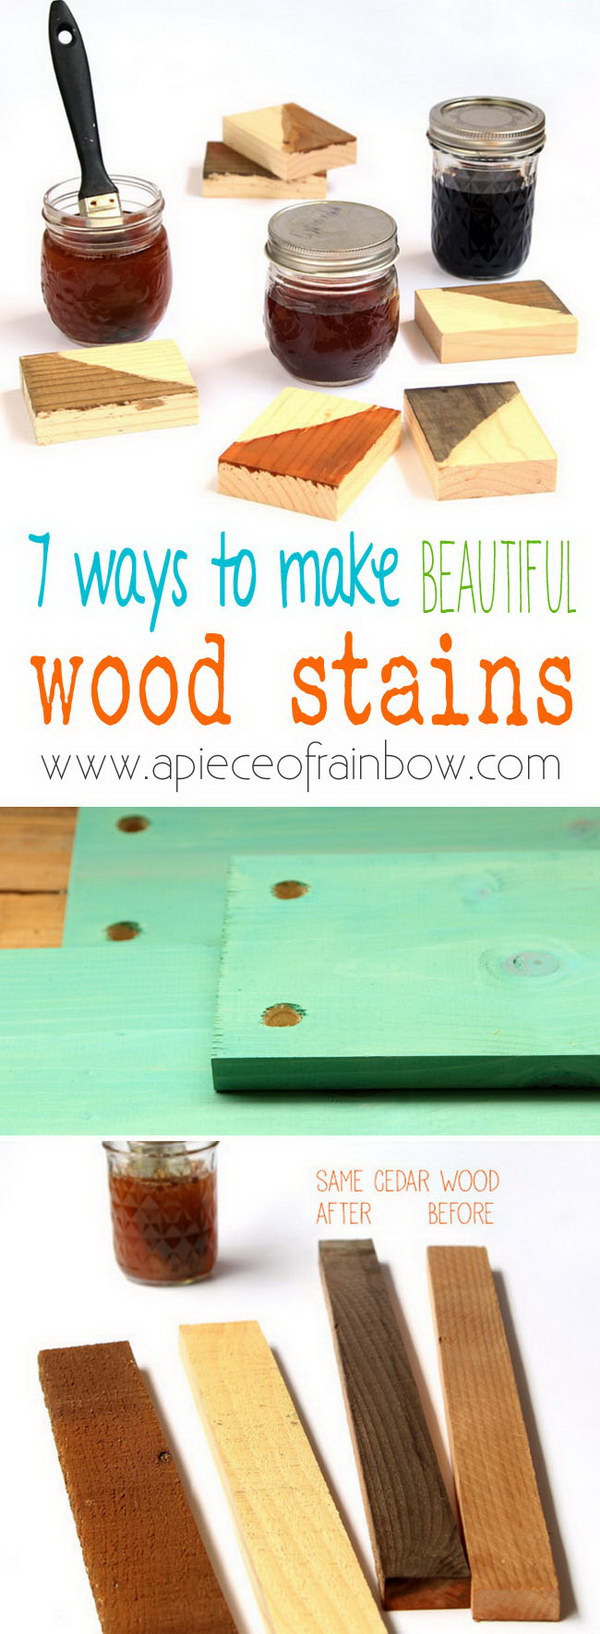 Homemade Natural & Effective Wood Stains. 